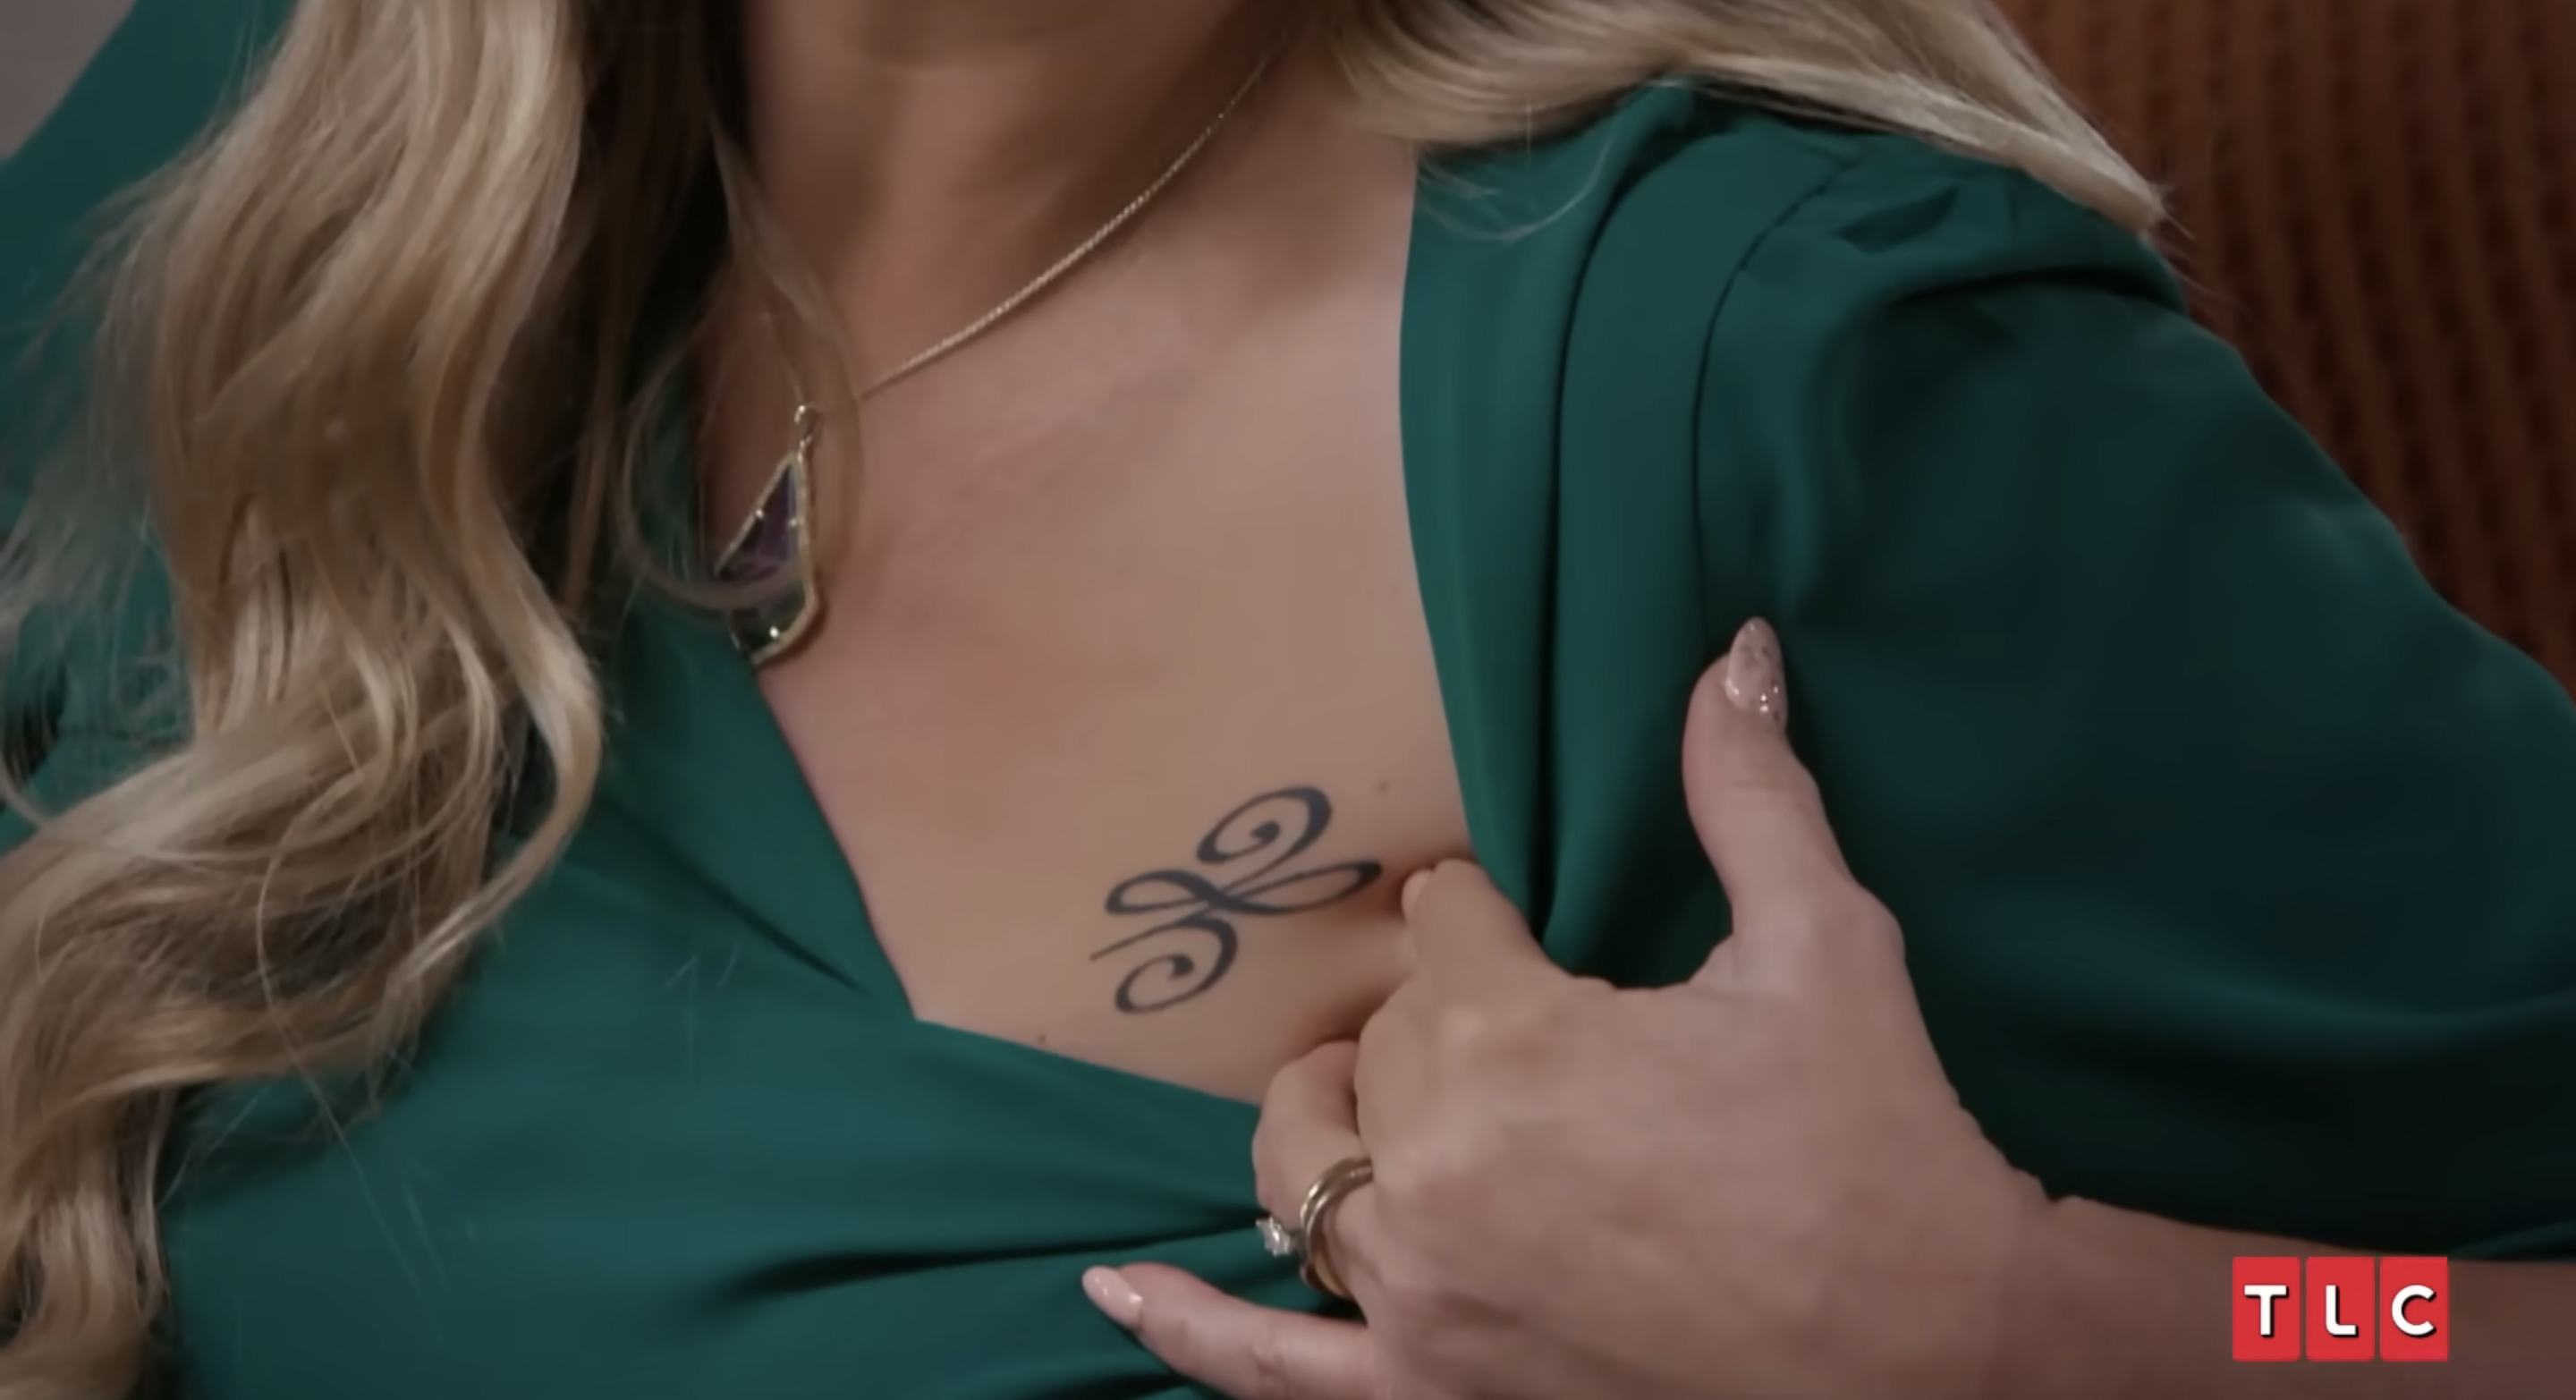 Christine revealed that she has a matching tattoo with her husband